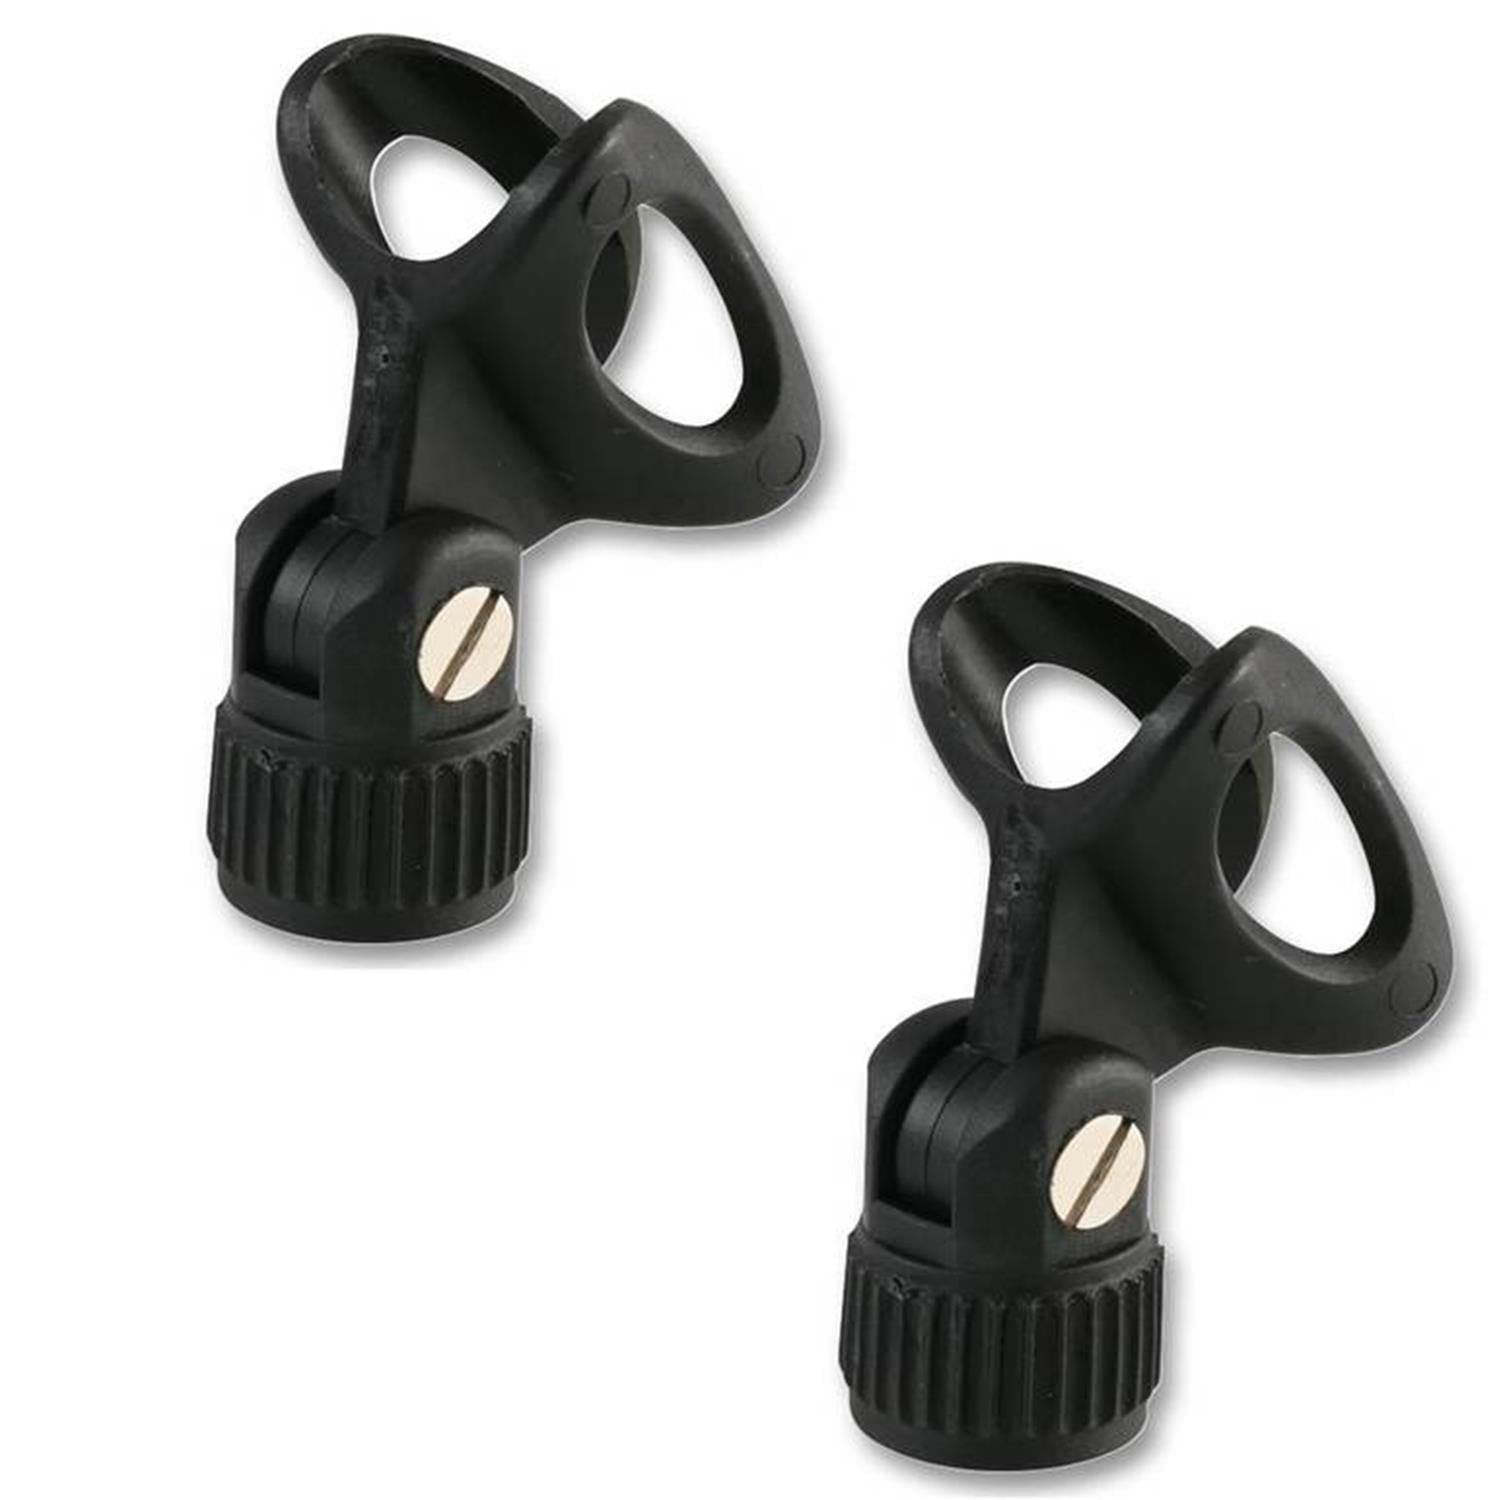 2 x Universal Rubber Microphone Clip Holder 22-25mm - DY Pro Audio